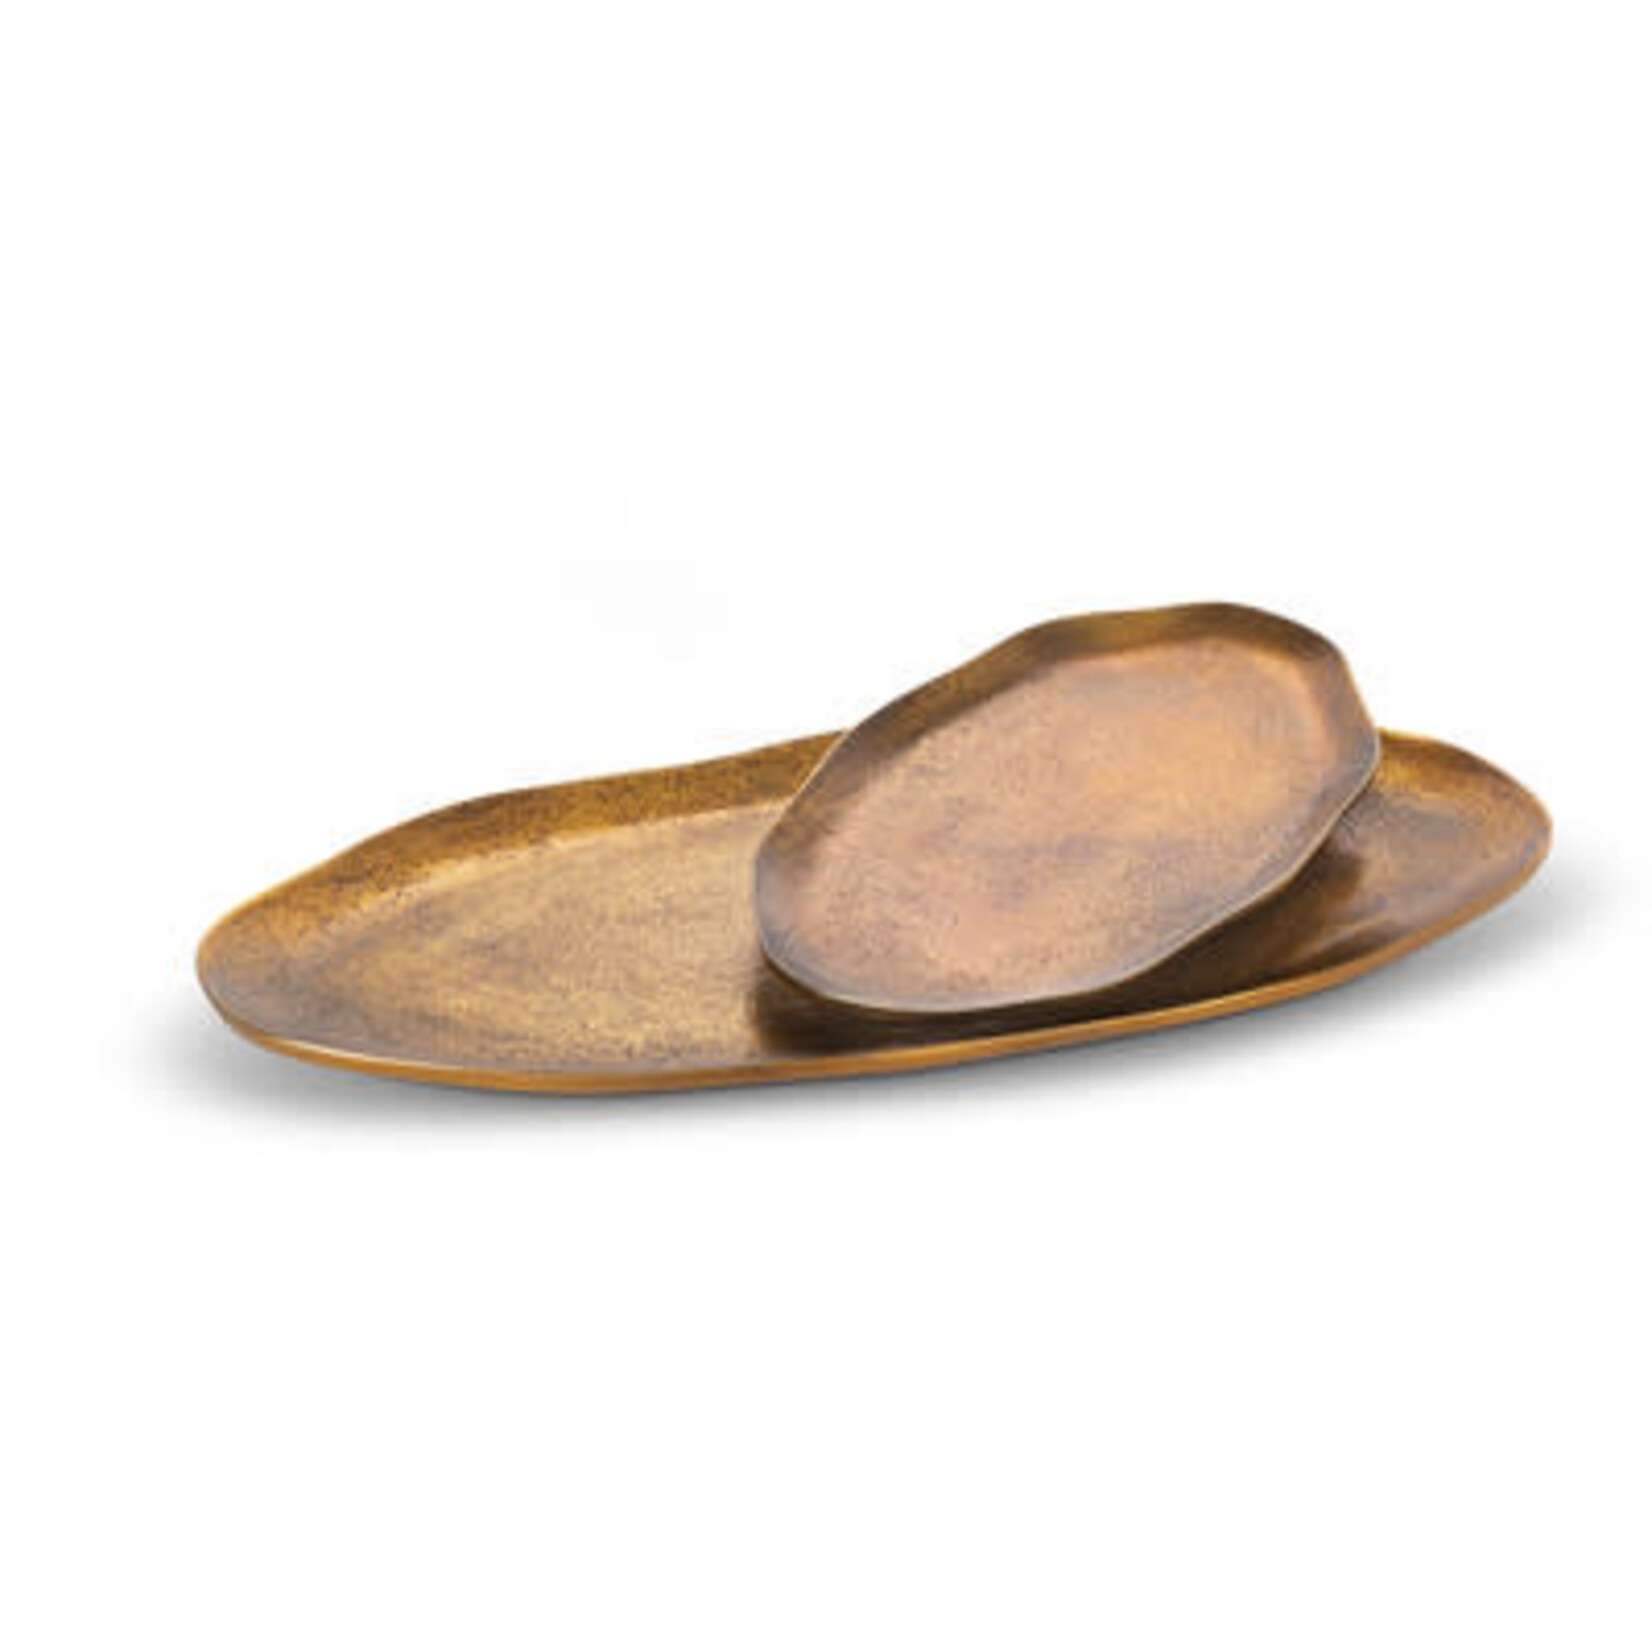 Park Hill Aluminum Bronze Oval Tray - Large